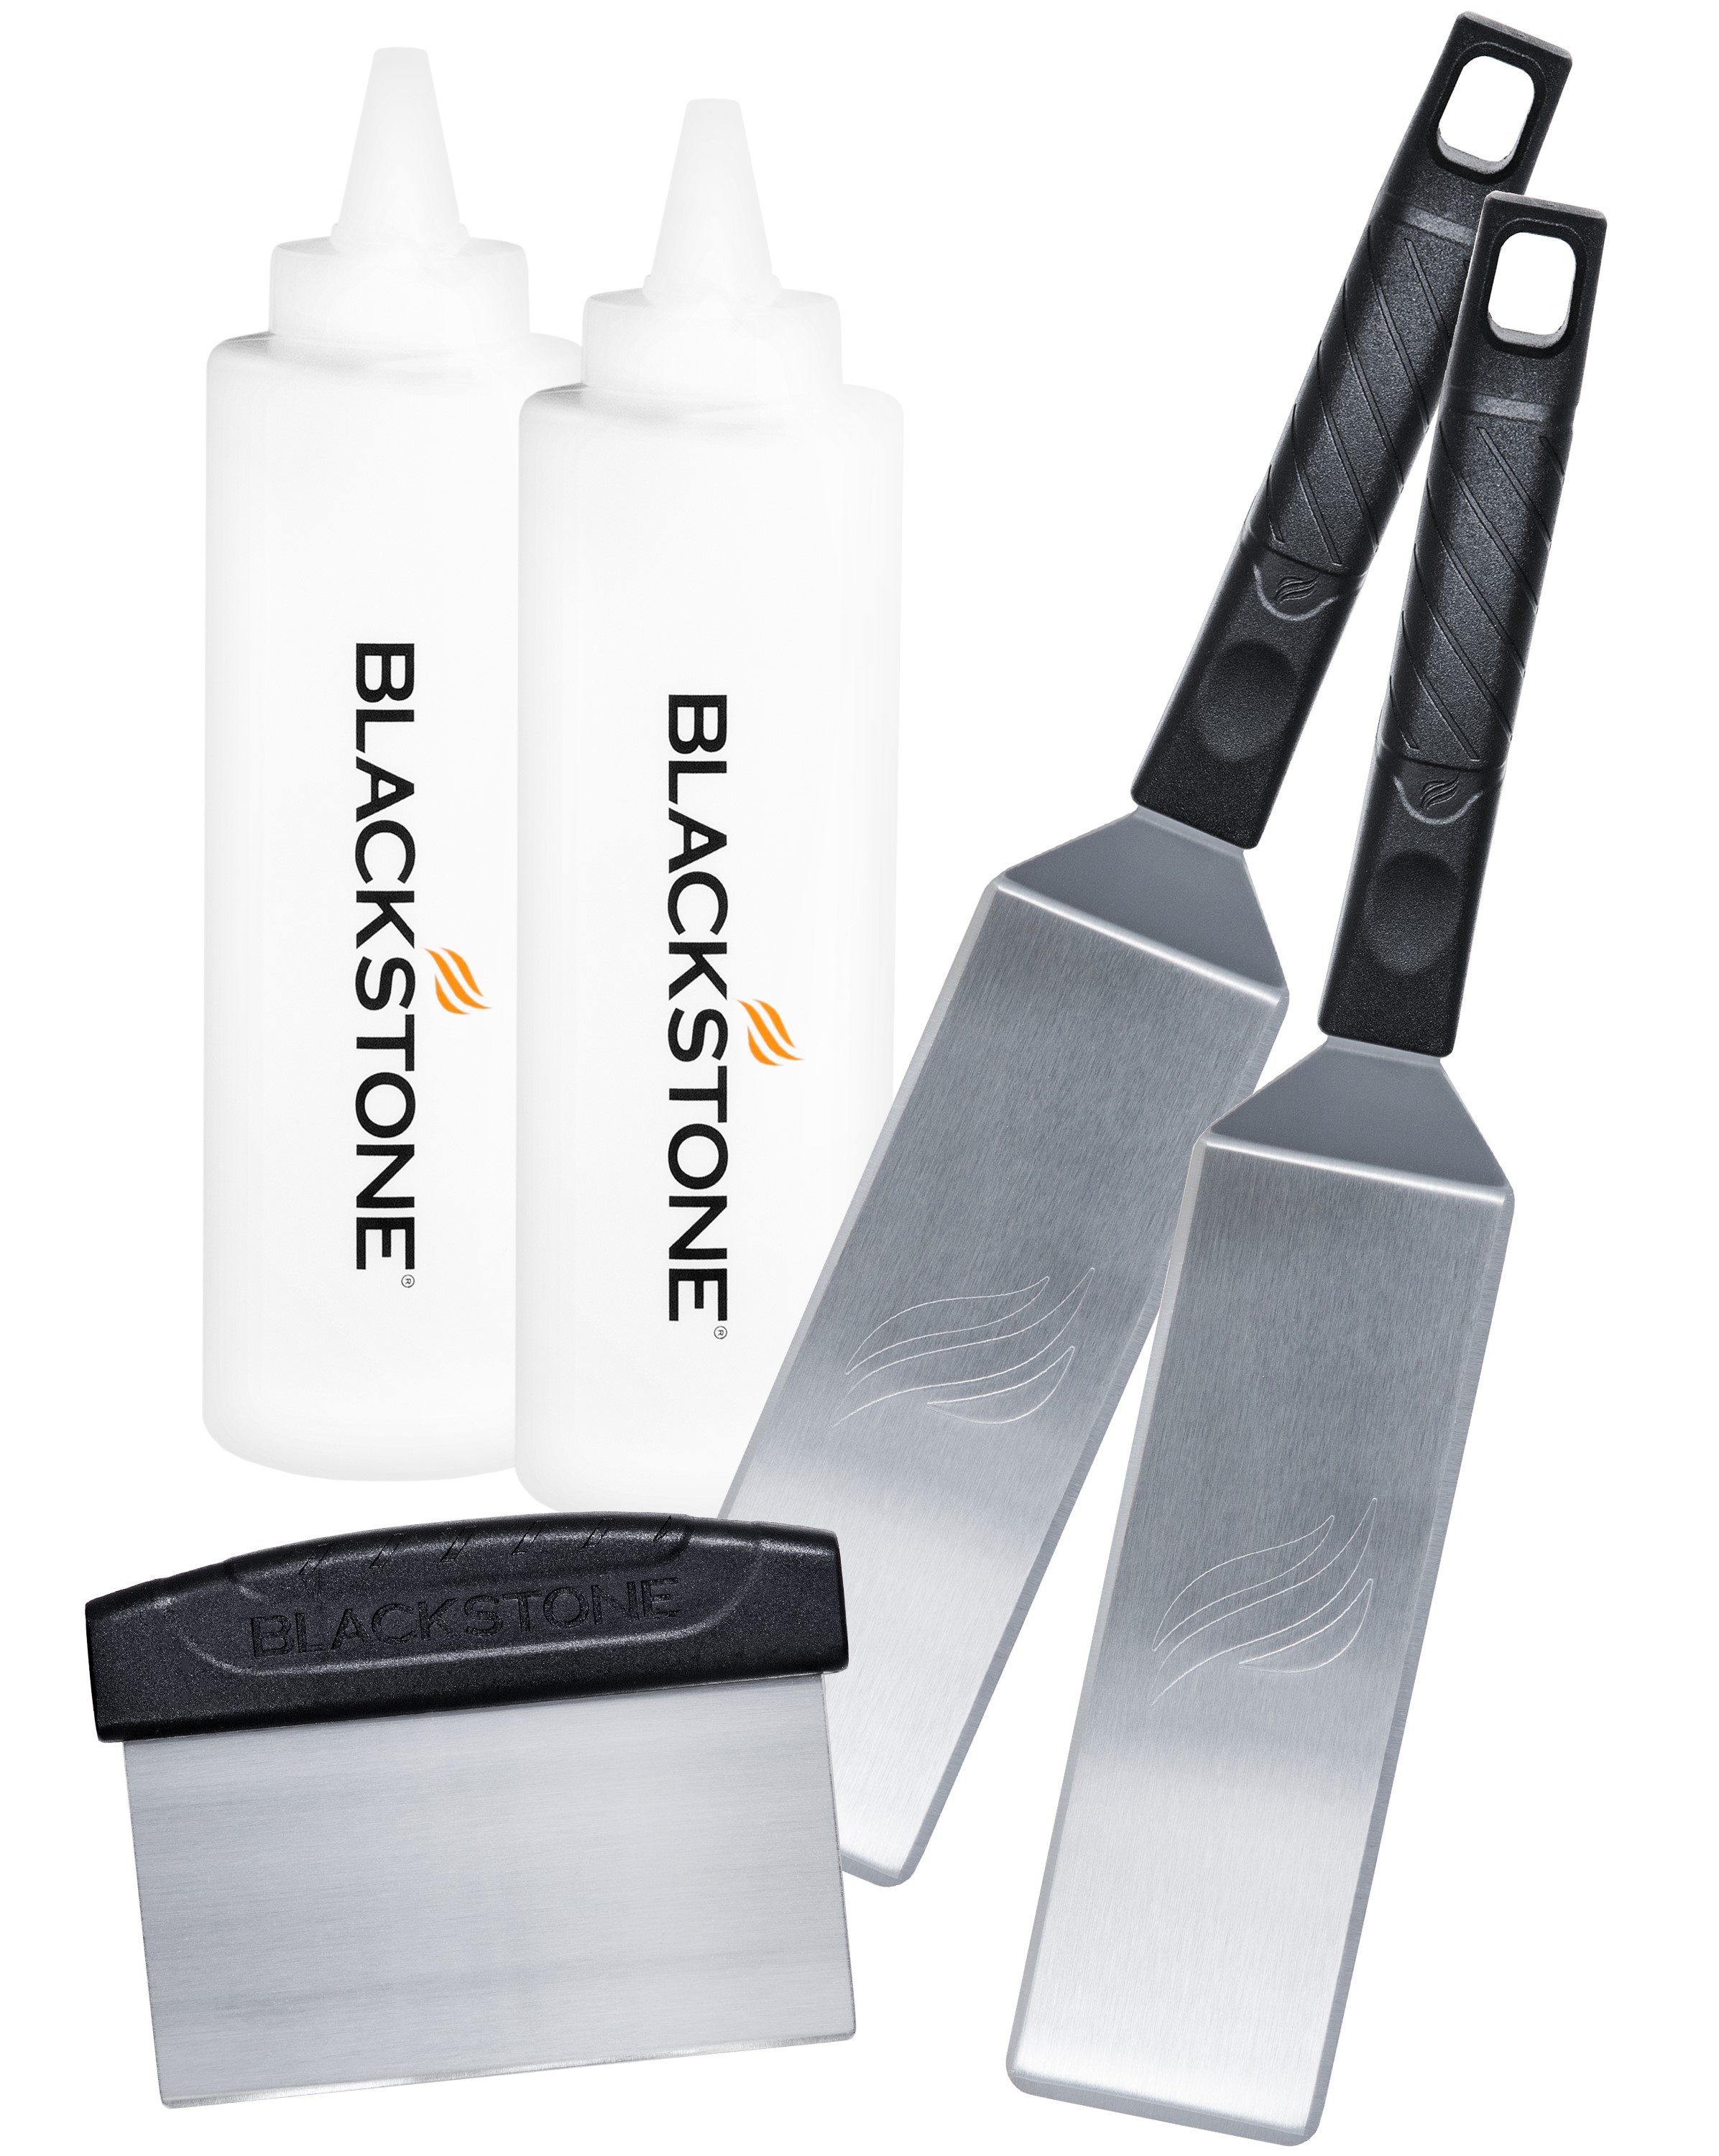 Blackstone Professional Griddle Accessory Tool Kit, 5-Piece - image 1 of 9